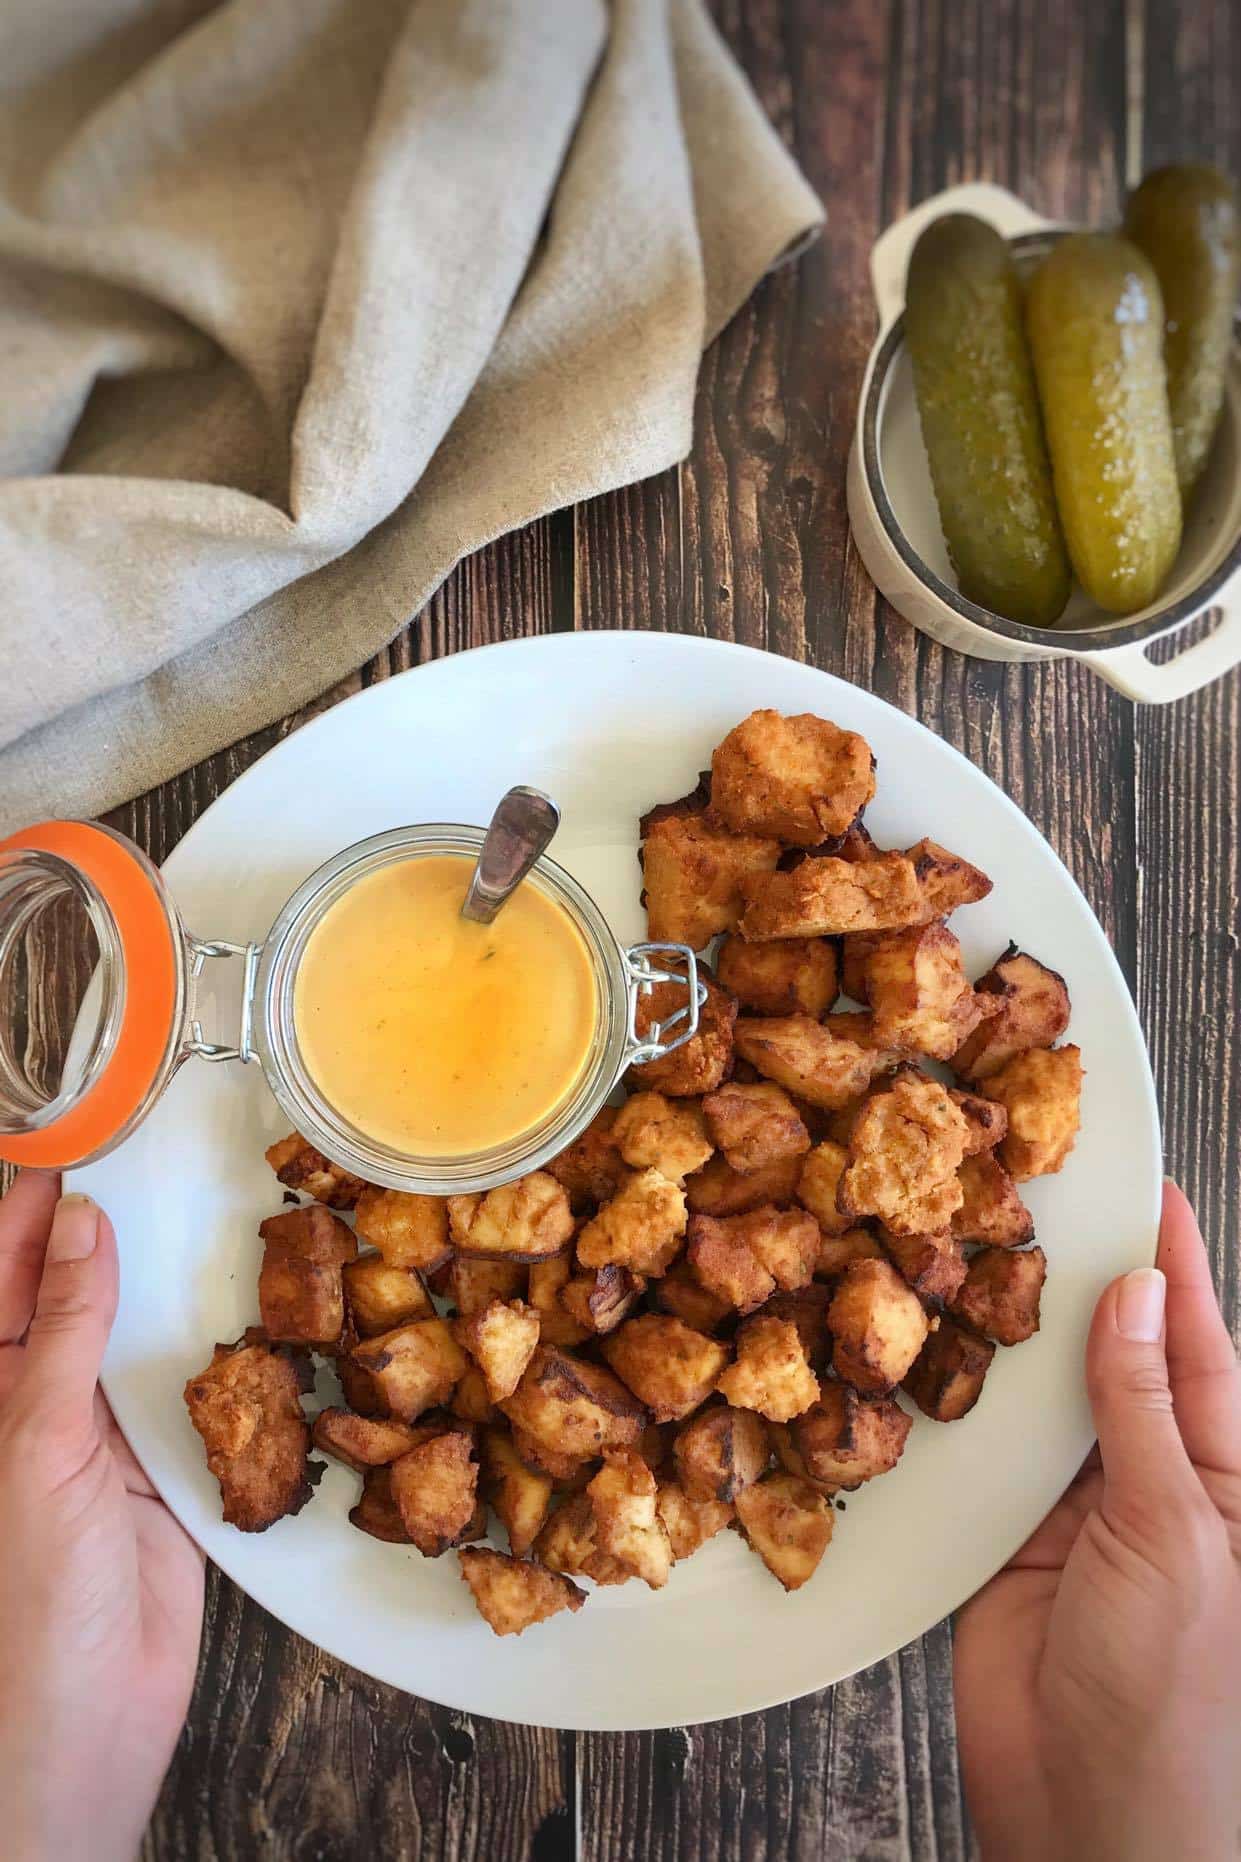 Vegan nuggets sit on a plate next to a dish with a dipping sauce on a wooden background. Hands come in to pick up the plate.